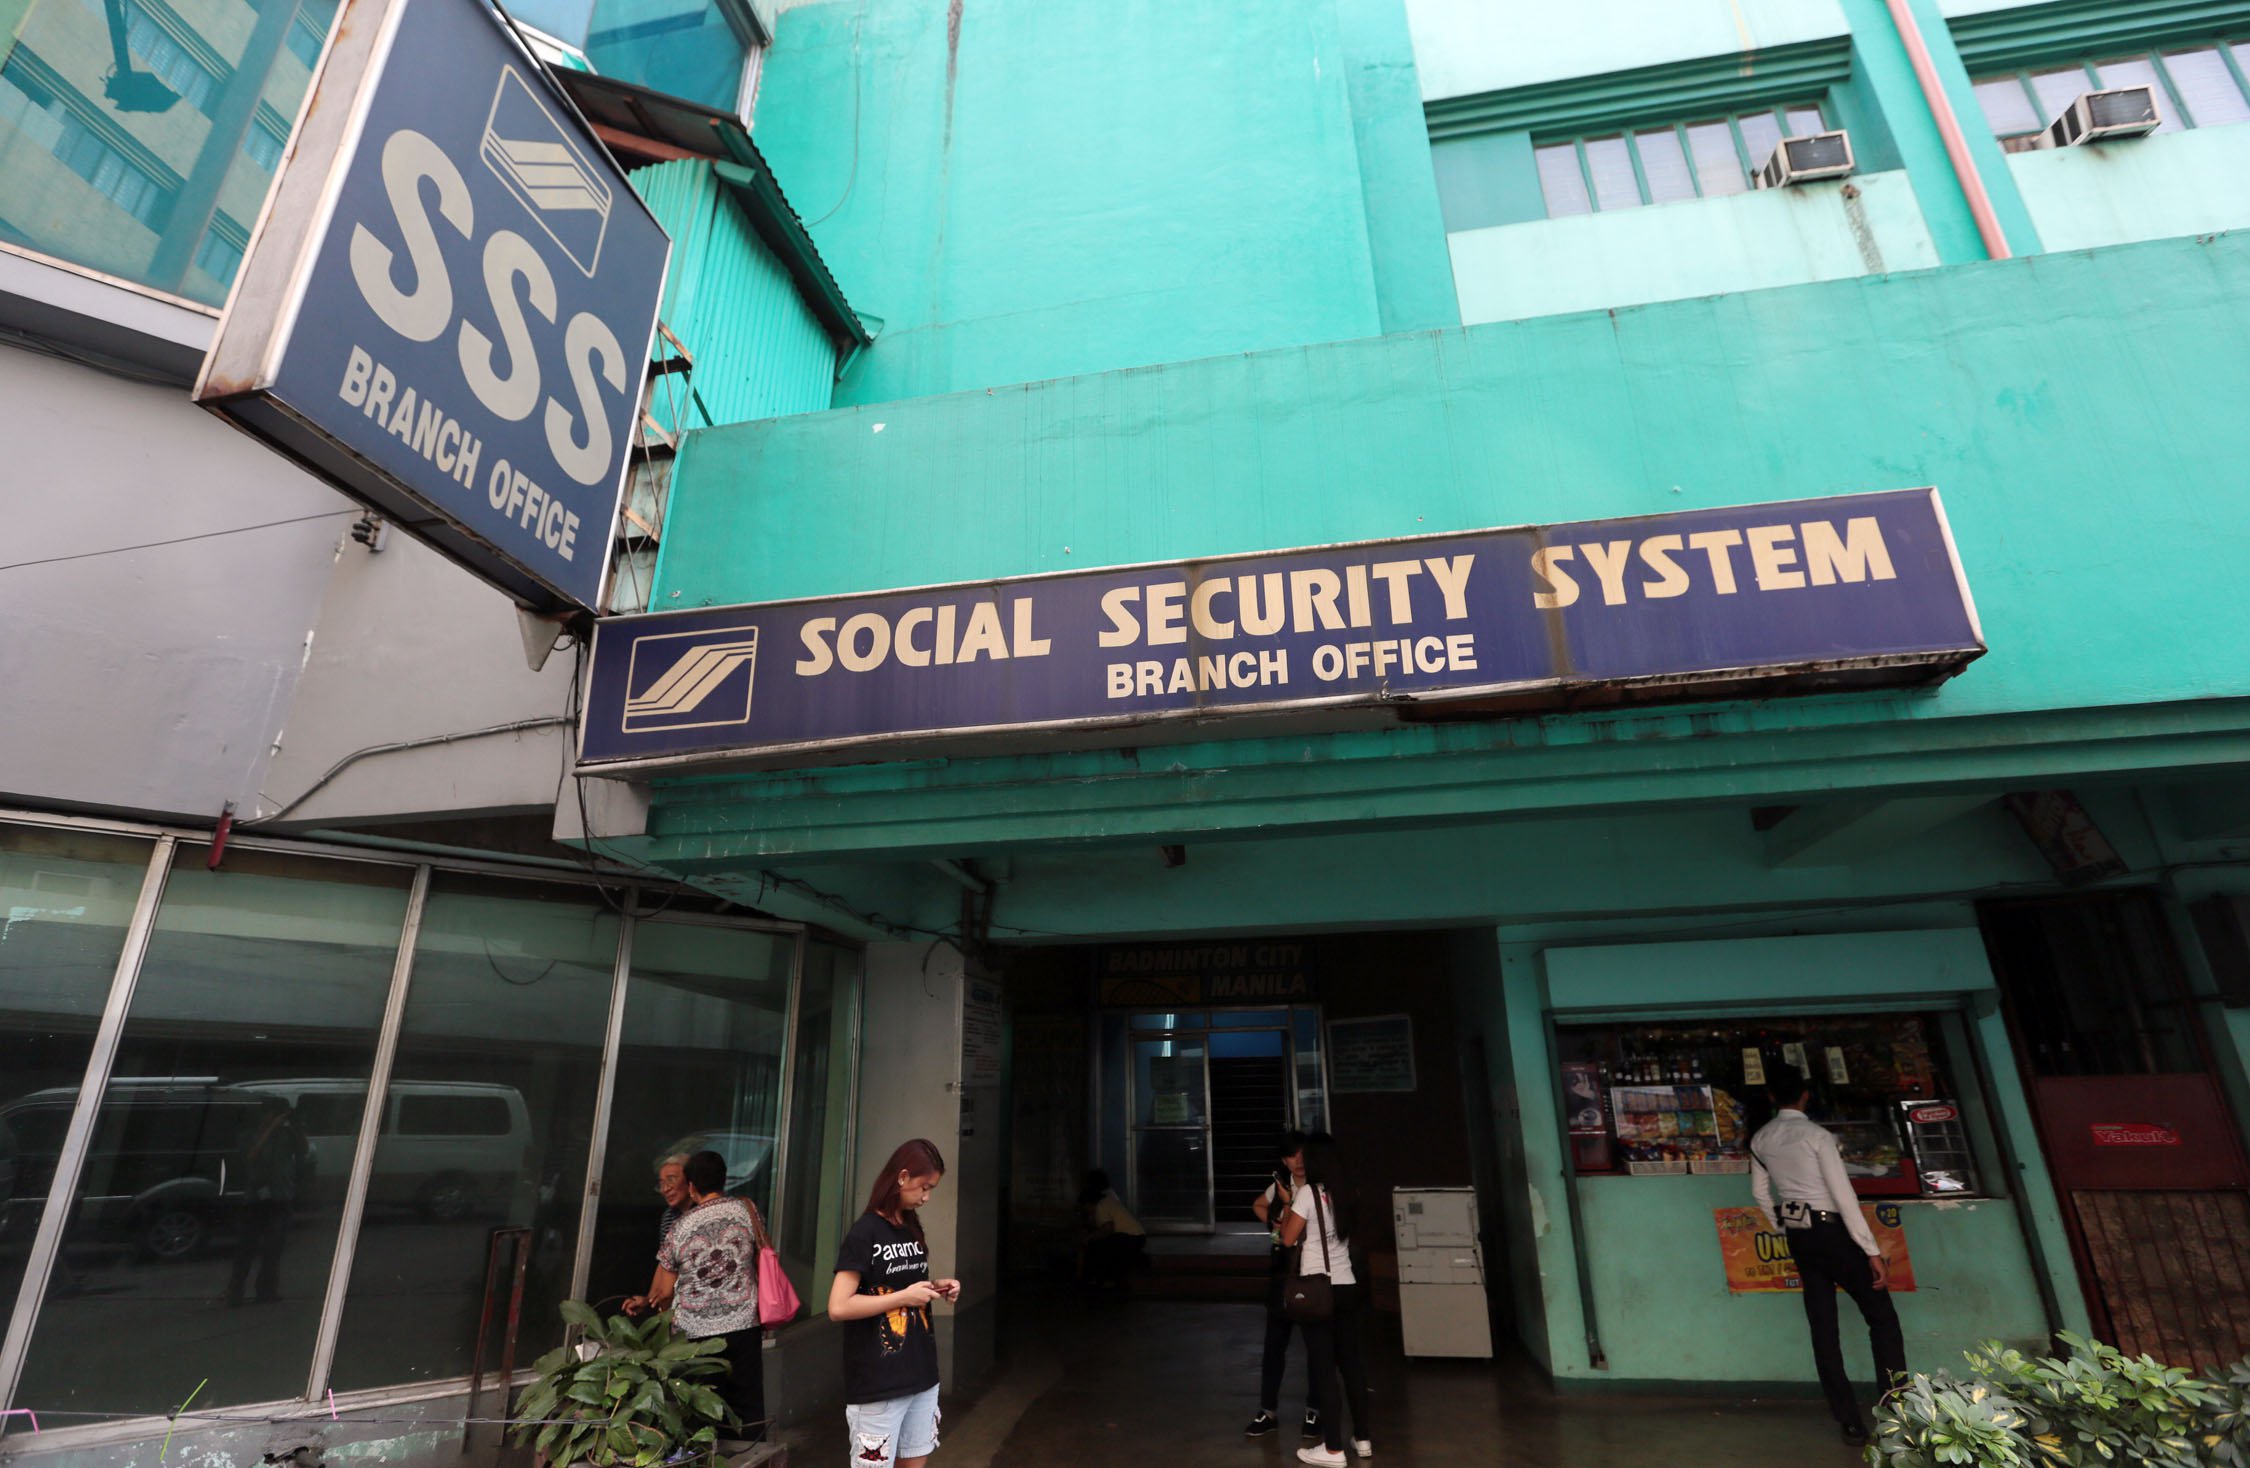 Dead SSS members' legal spouses urged to file benefits claims online